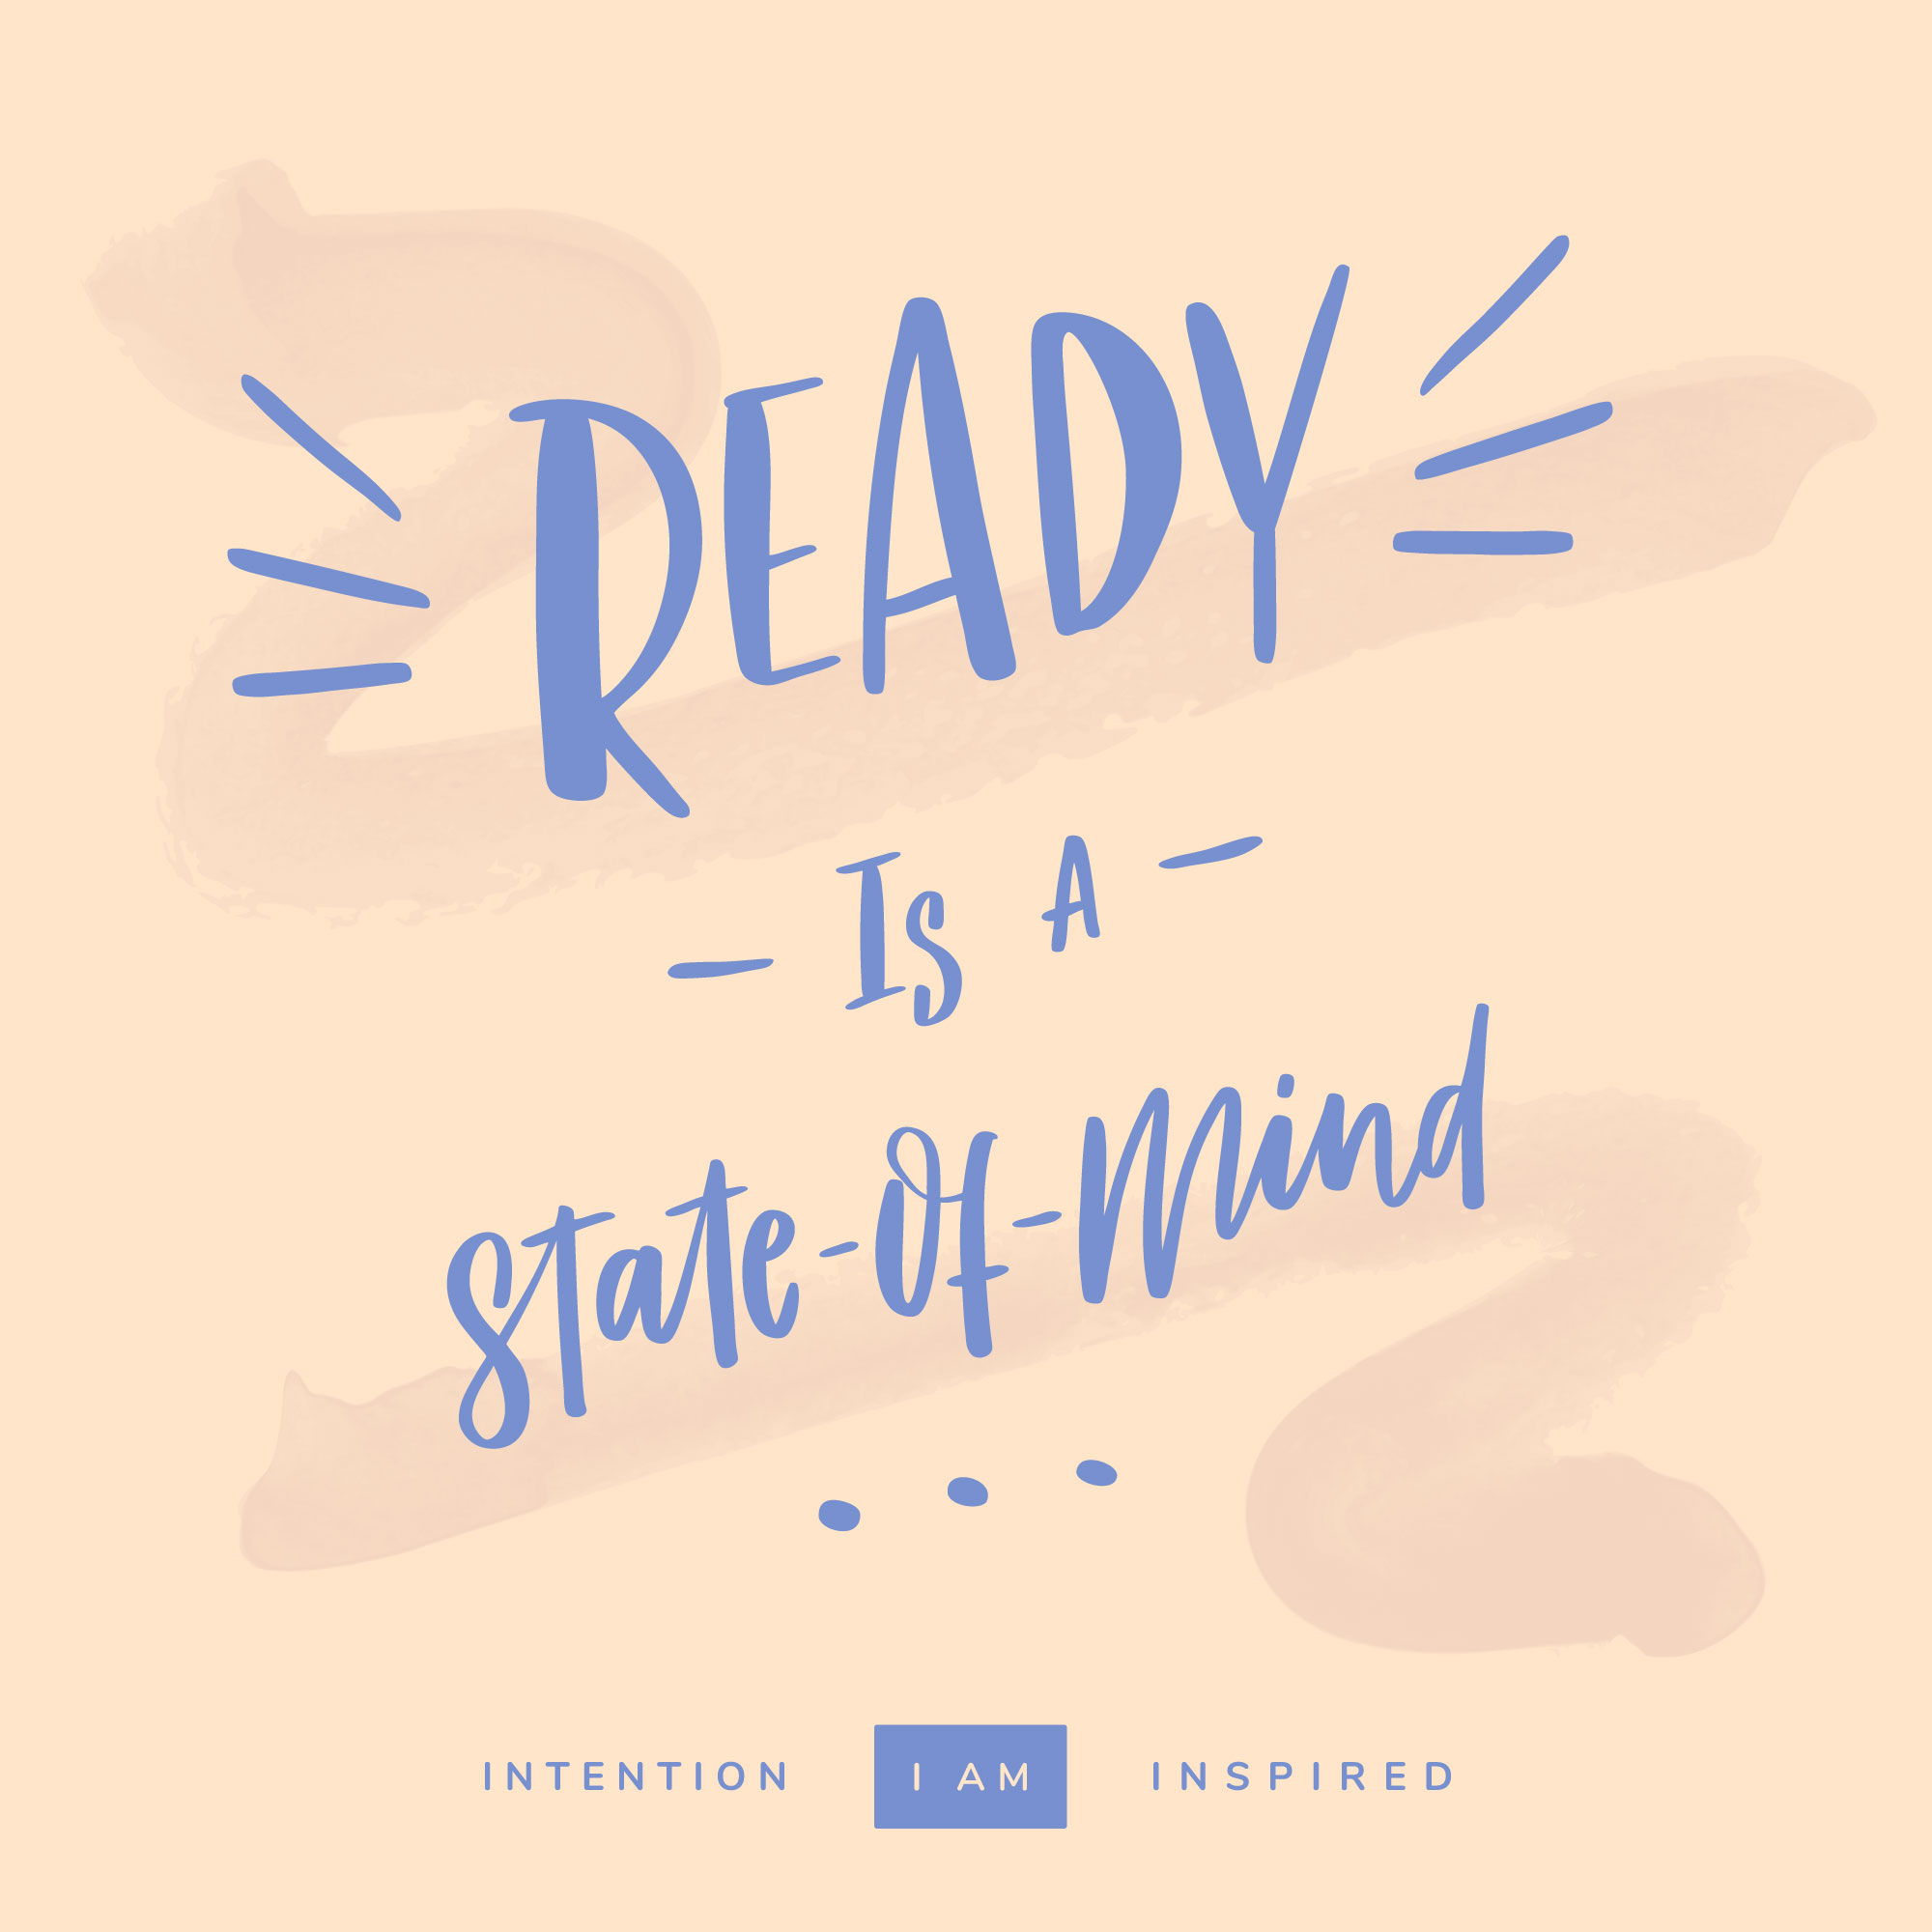 Ready is a state-of-mind.